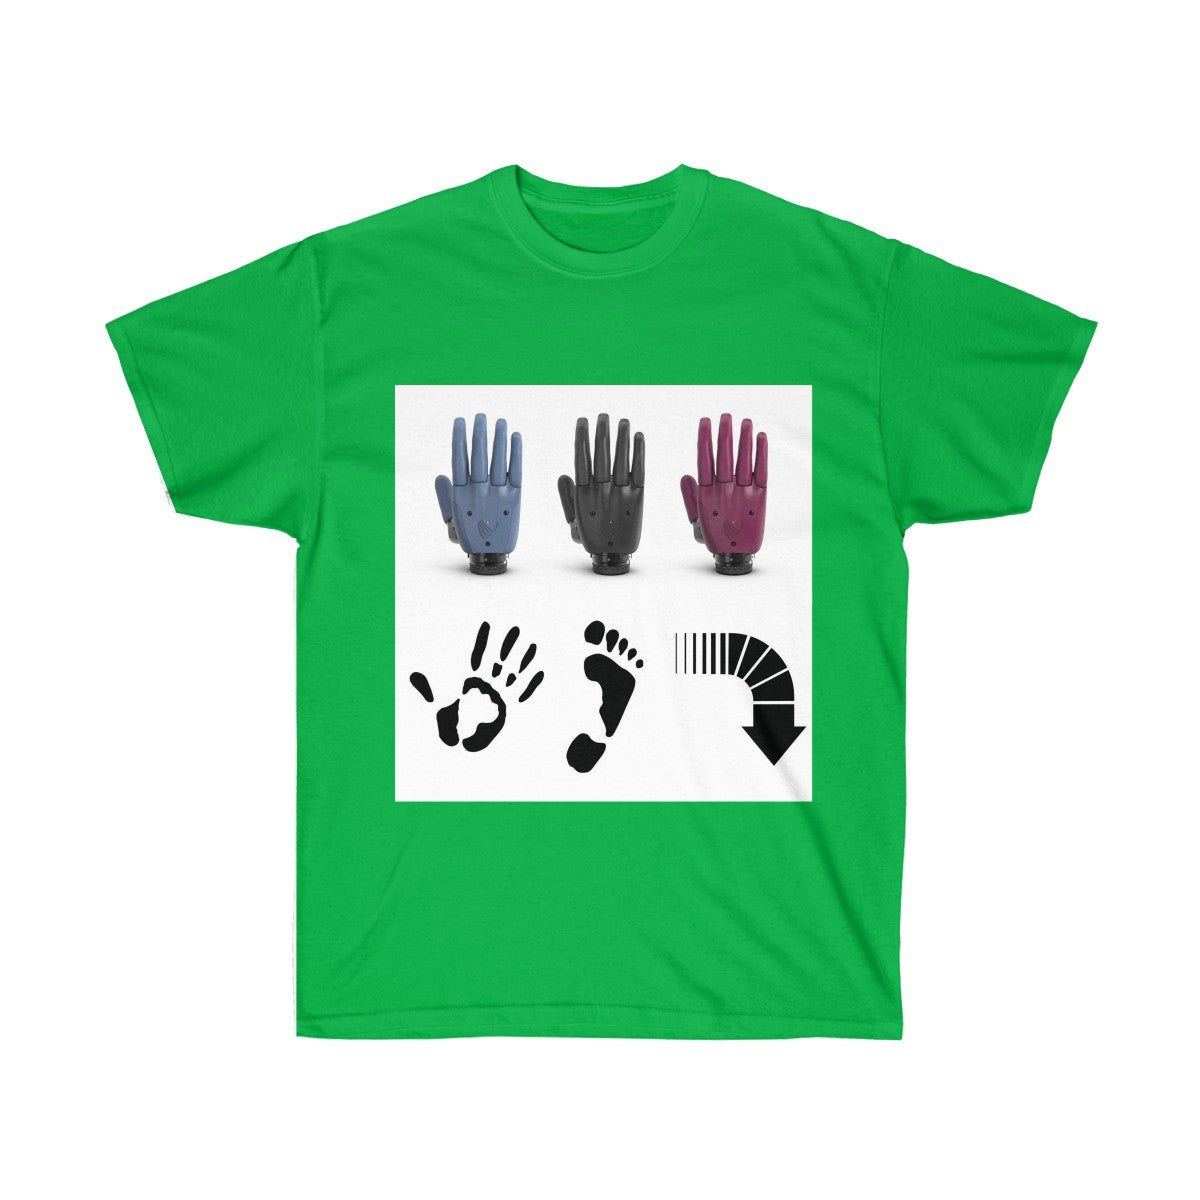 Five Toes Down Amputee Unisex Tee